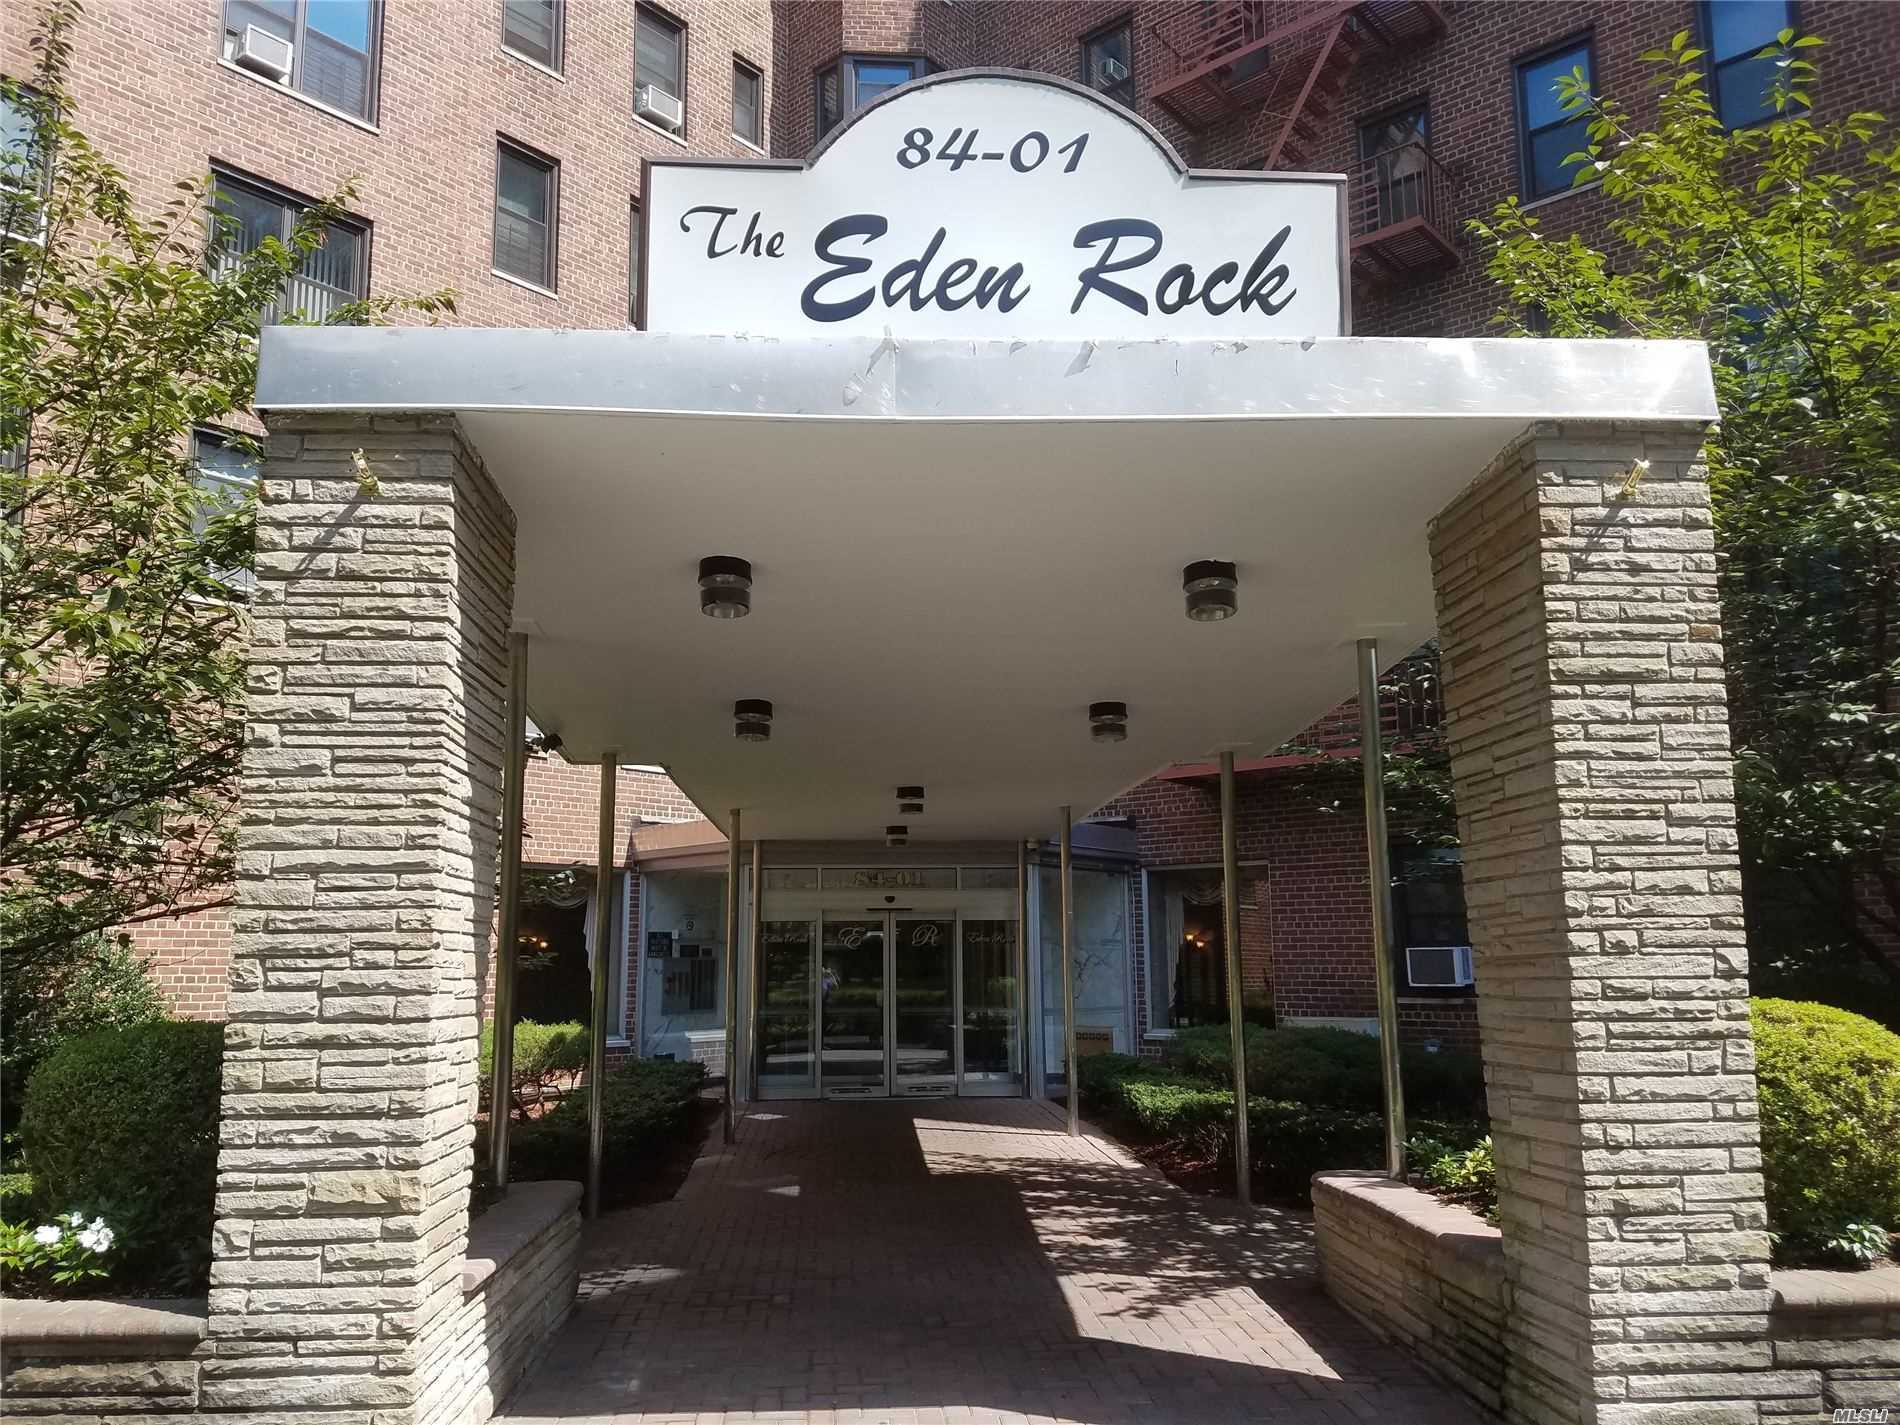 Very sunny & spacious one br apt with open views at the prestigious Eden Rock in the heart of Briarwood. offers large living room, raised dining area, beautiful HW floors, renovated kitchen, S/S appliances, Granite counter tops, renovated bathroom, new doors & Windows, spacious bedroom W/ample closet space. The Eden Rock, 24 hr D/M building with Gym, Laundry room, near Exp trains to NYC, buses, shops, major highways and airports. Pets are welcome, Mint Condition, just unpack and move right-in.